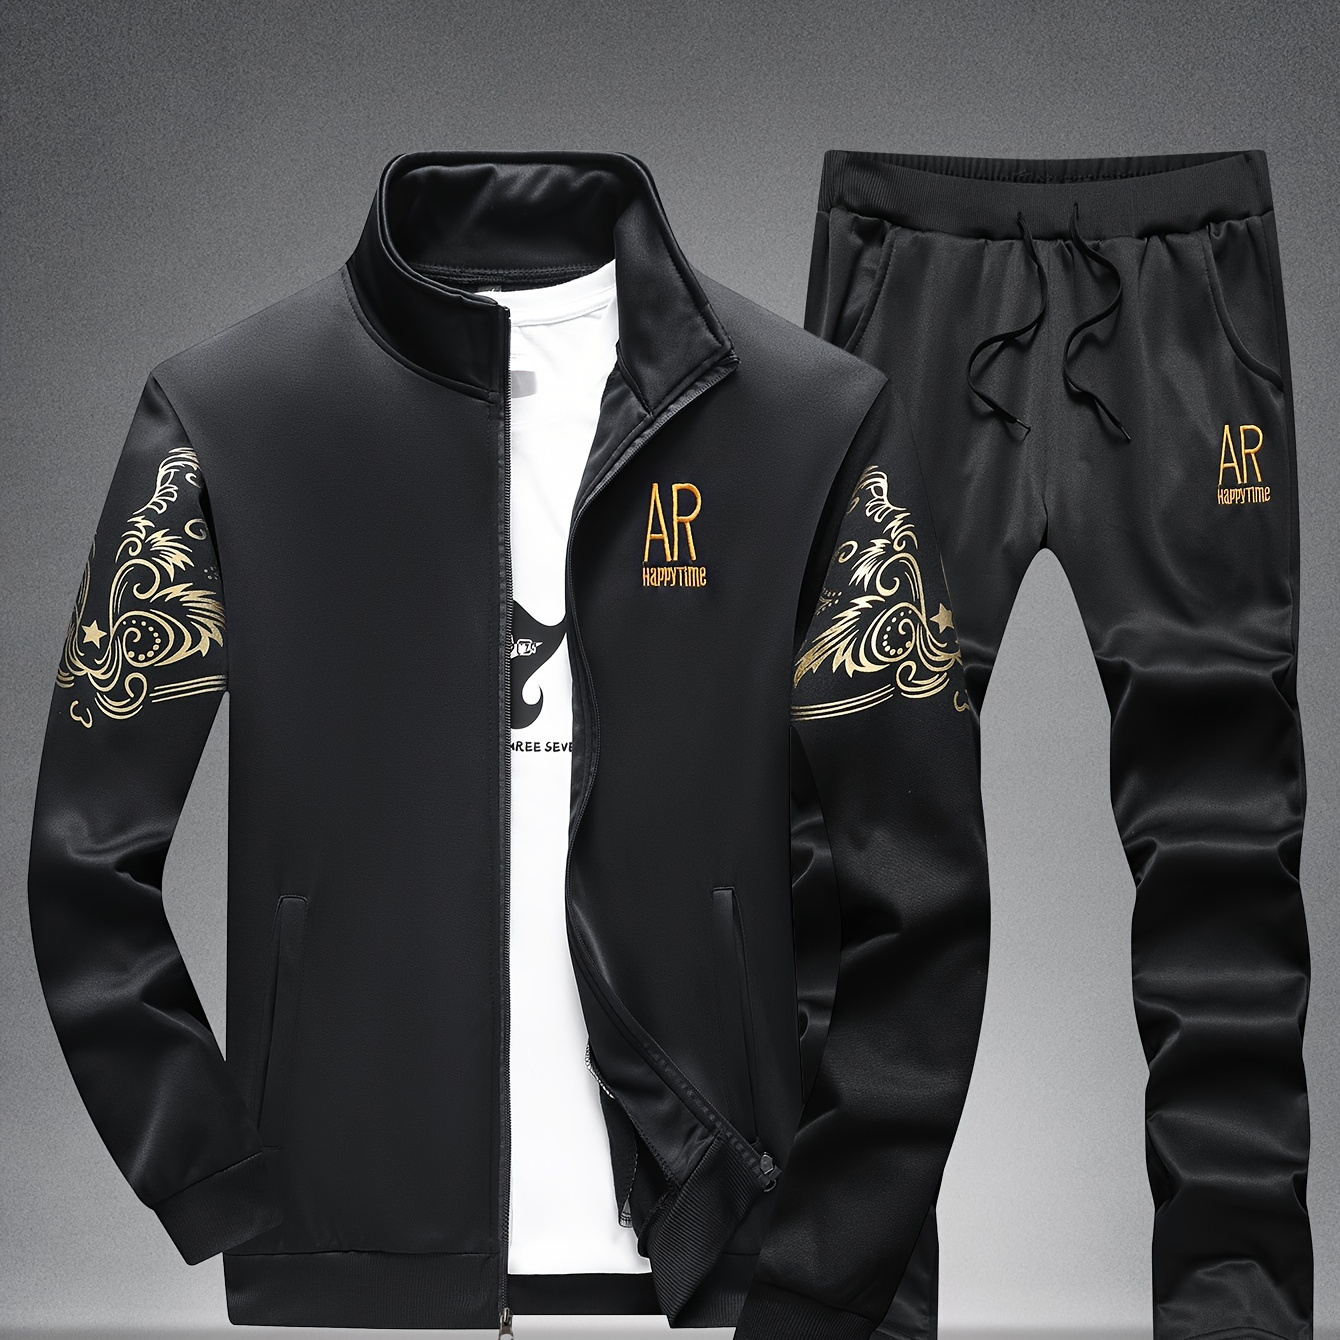 

2-piece Men's Sports Outfit Set, Letter Embroidered Long Sleeve Full Zip Up Sweatshirt & Drawstring Sweatpants Set For Spring Fall